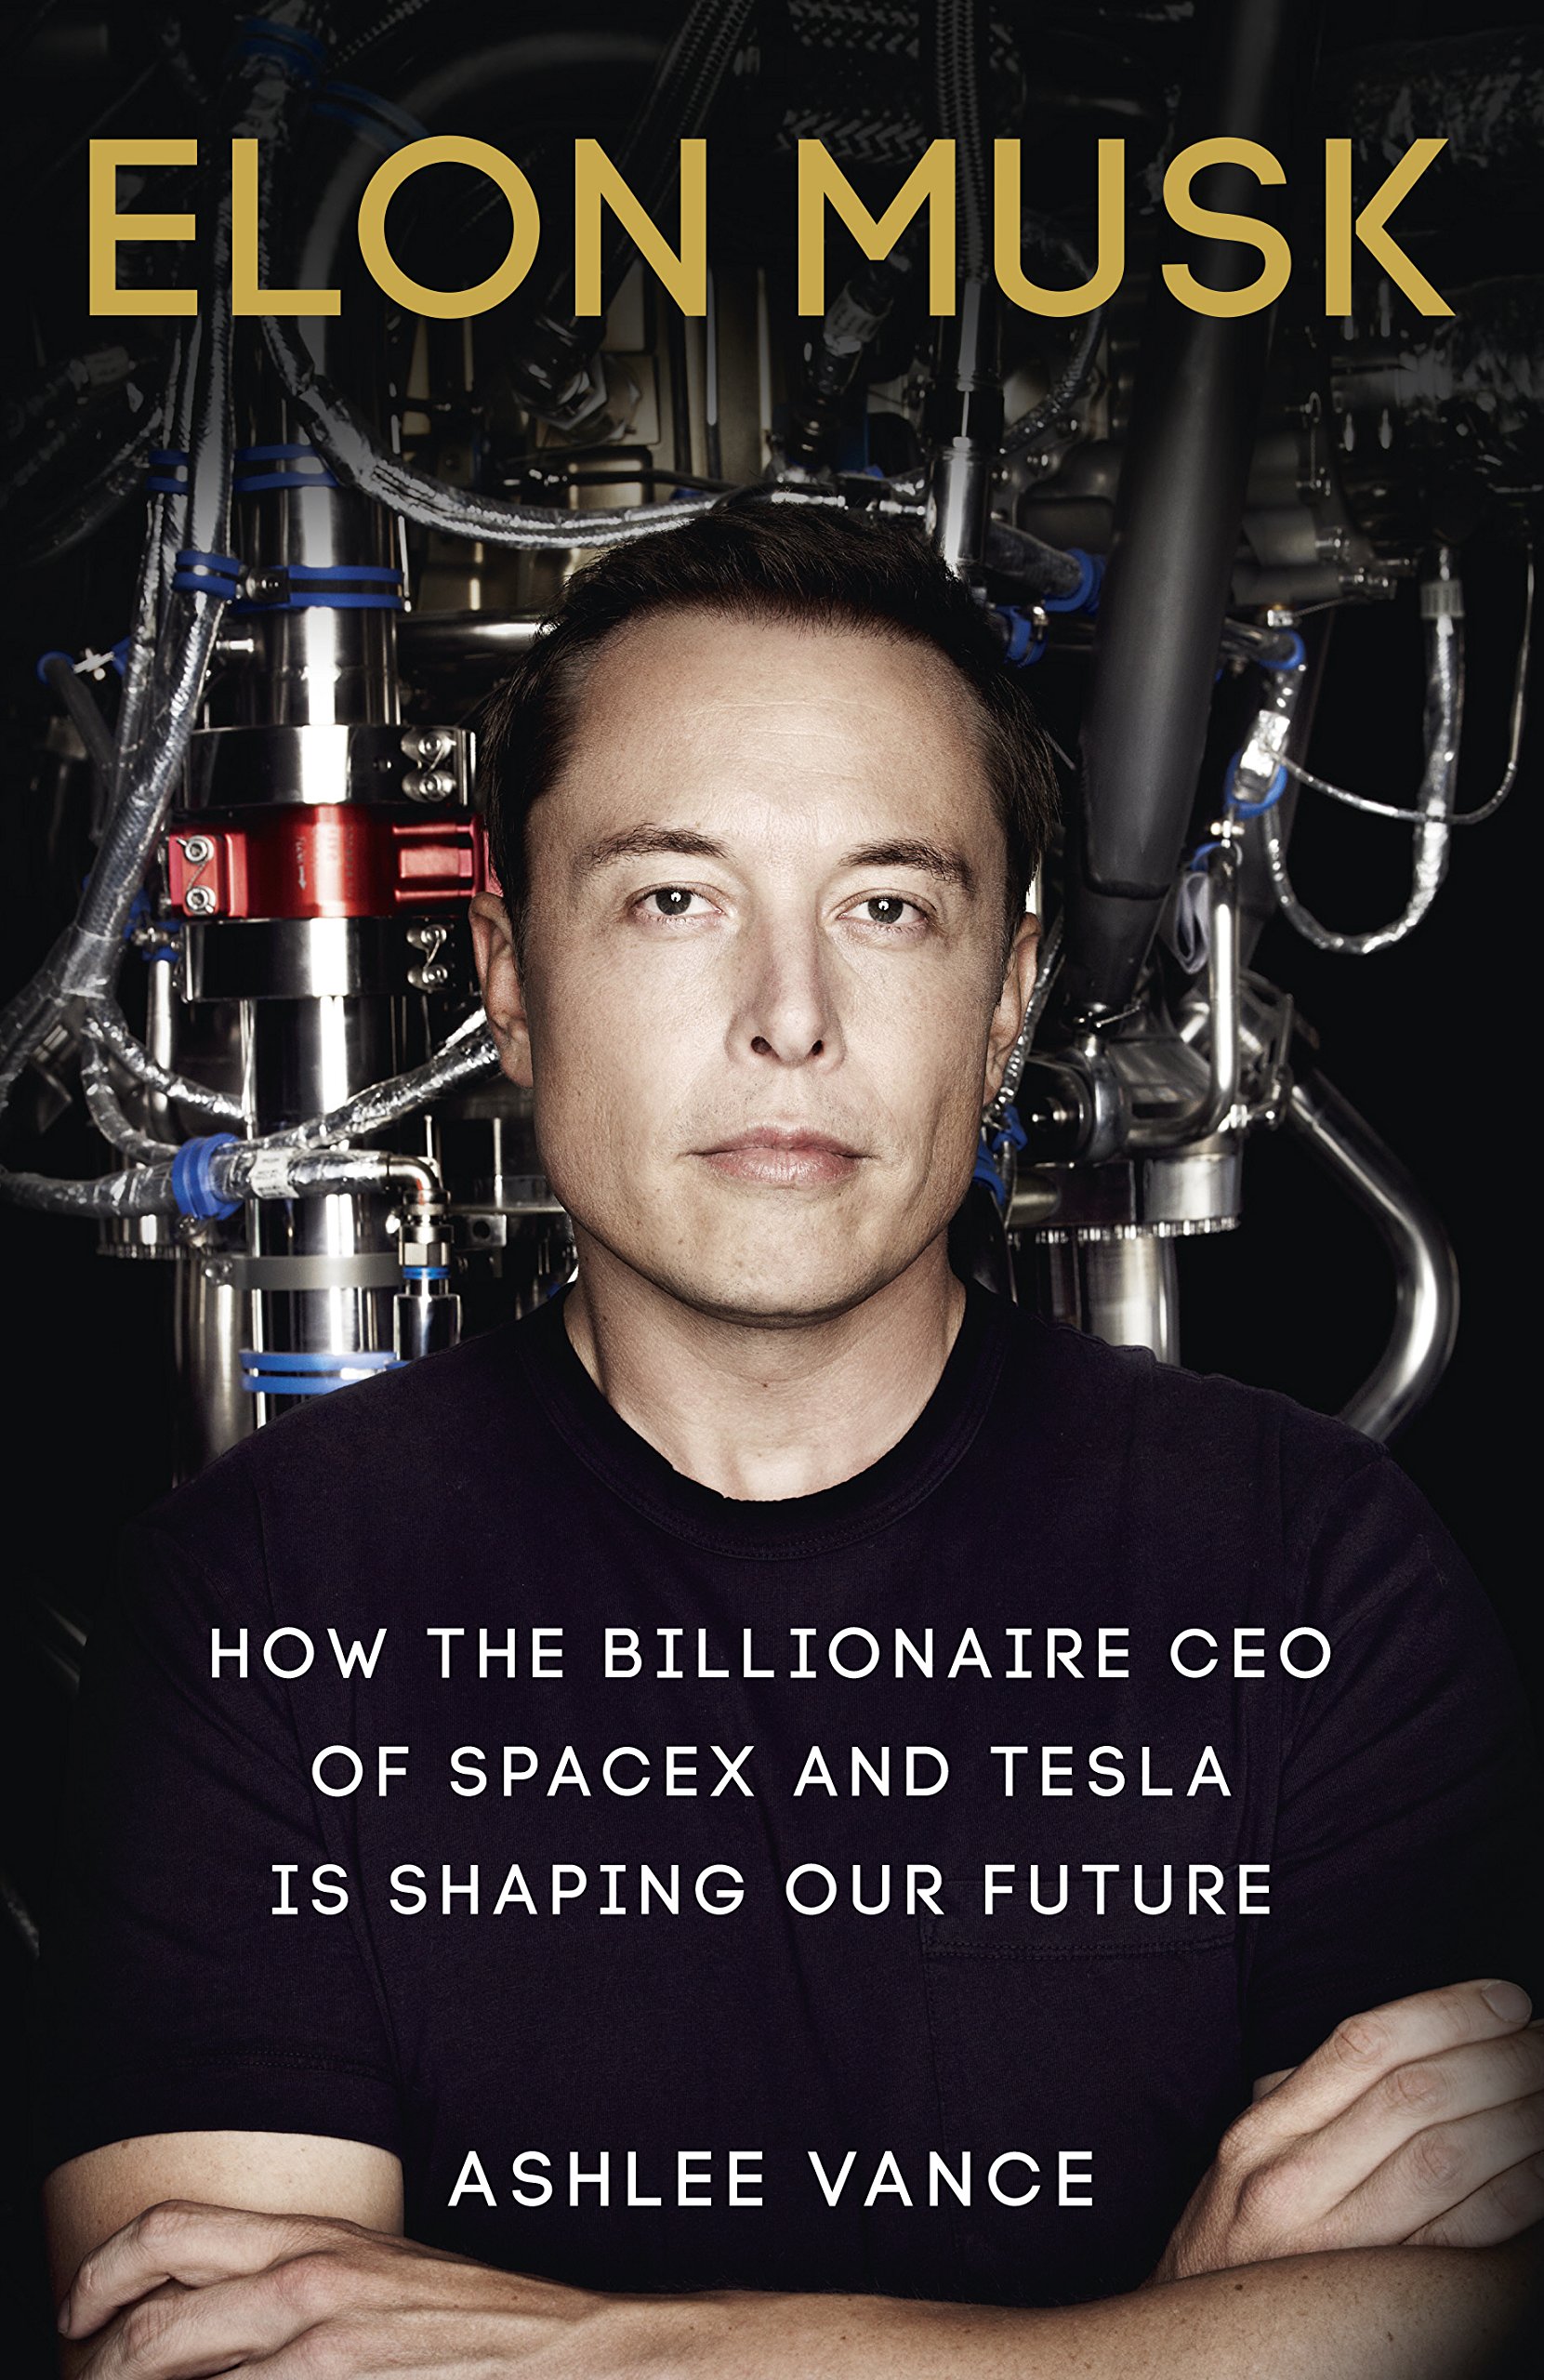 Book & Wine Wednesday! Reading Sara Review of Elon Musk: Tesla, SpaceX